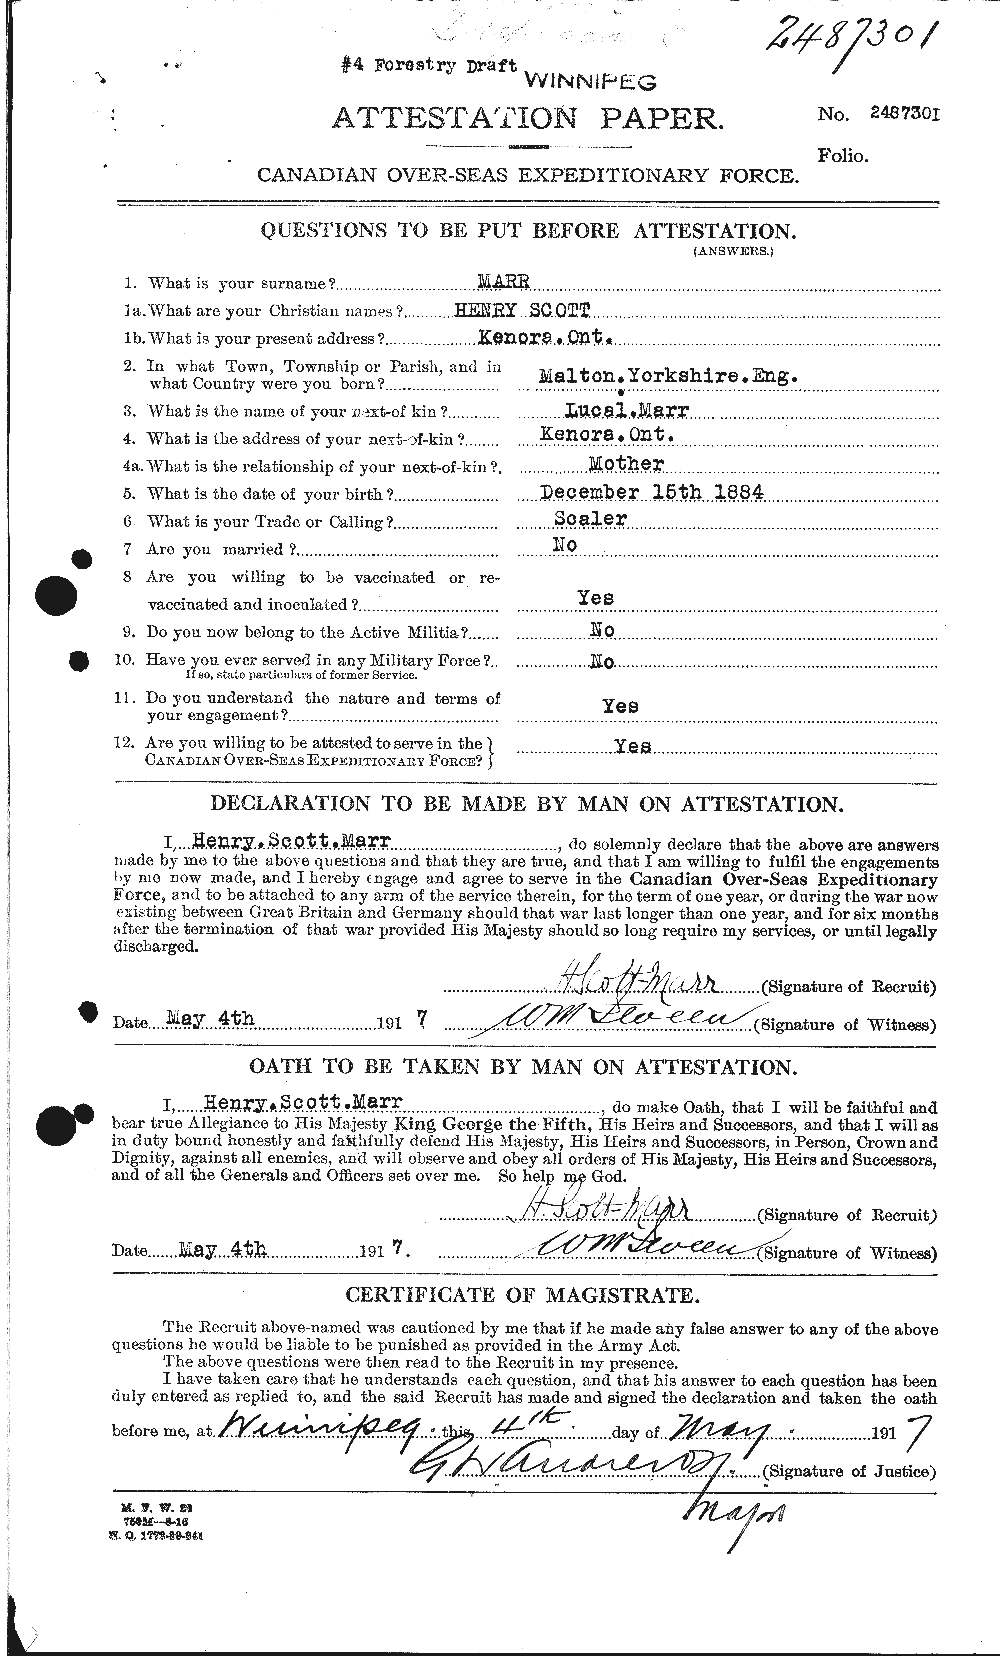 Personnel Records of the First World War - CEF 485640a